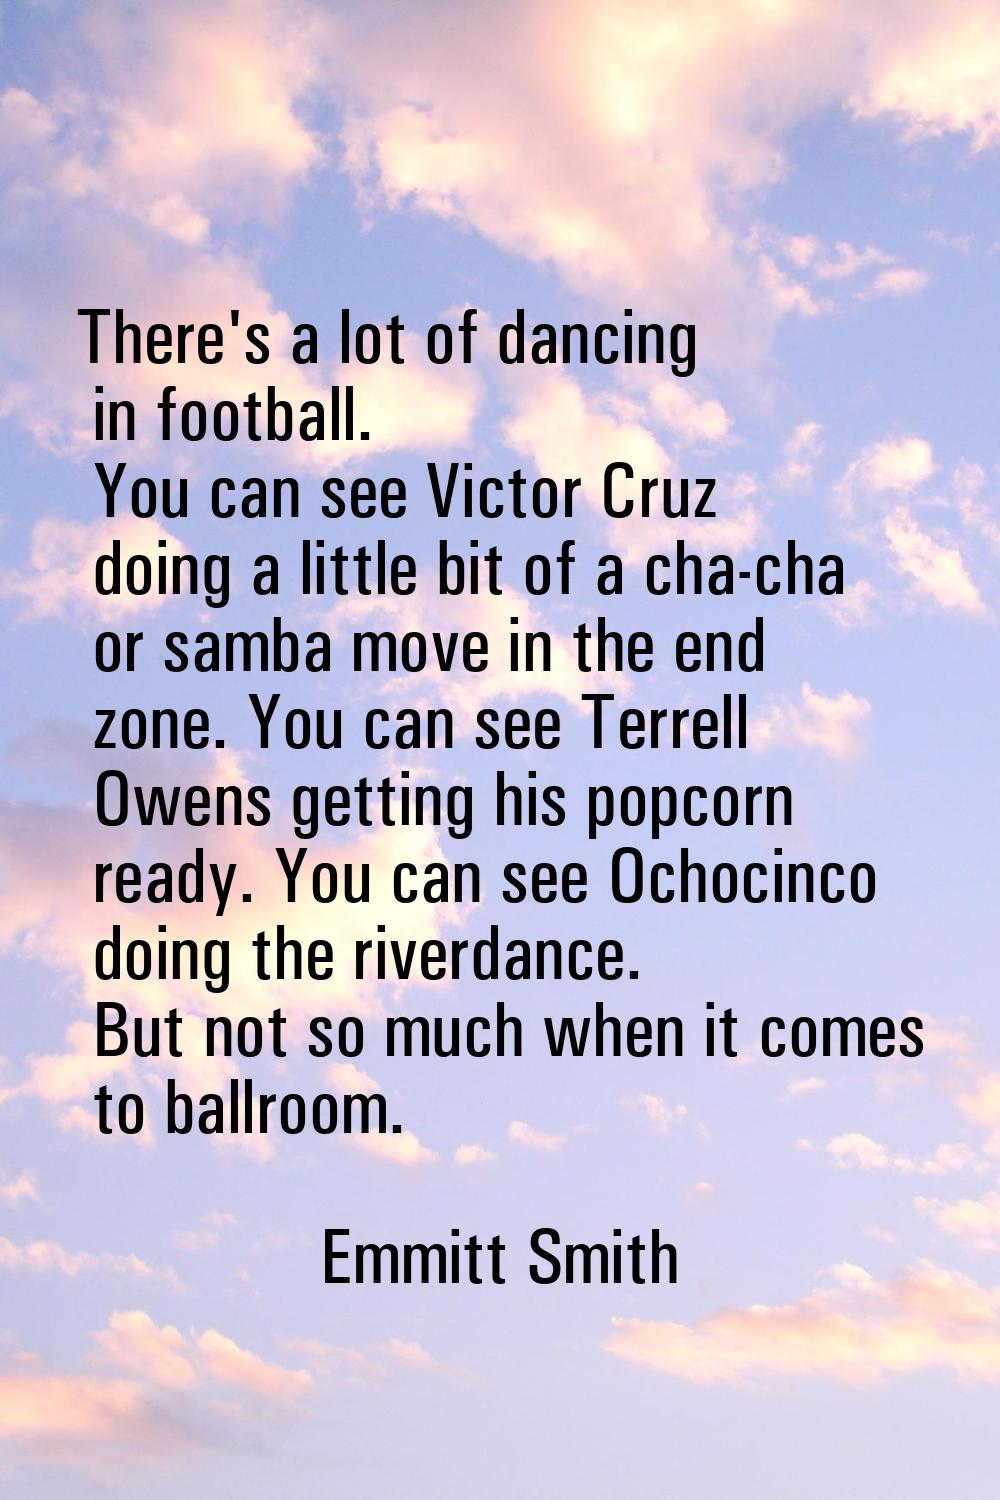 There's a lot of dancing in football. You can see Victor Cruz doing a little bit of a cha-cha or sa